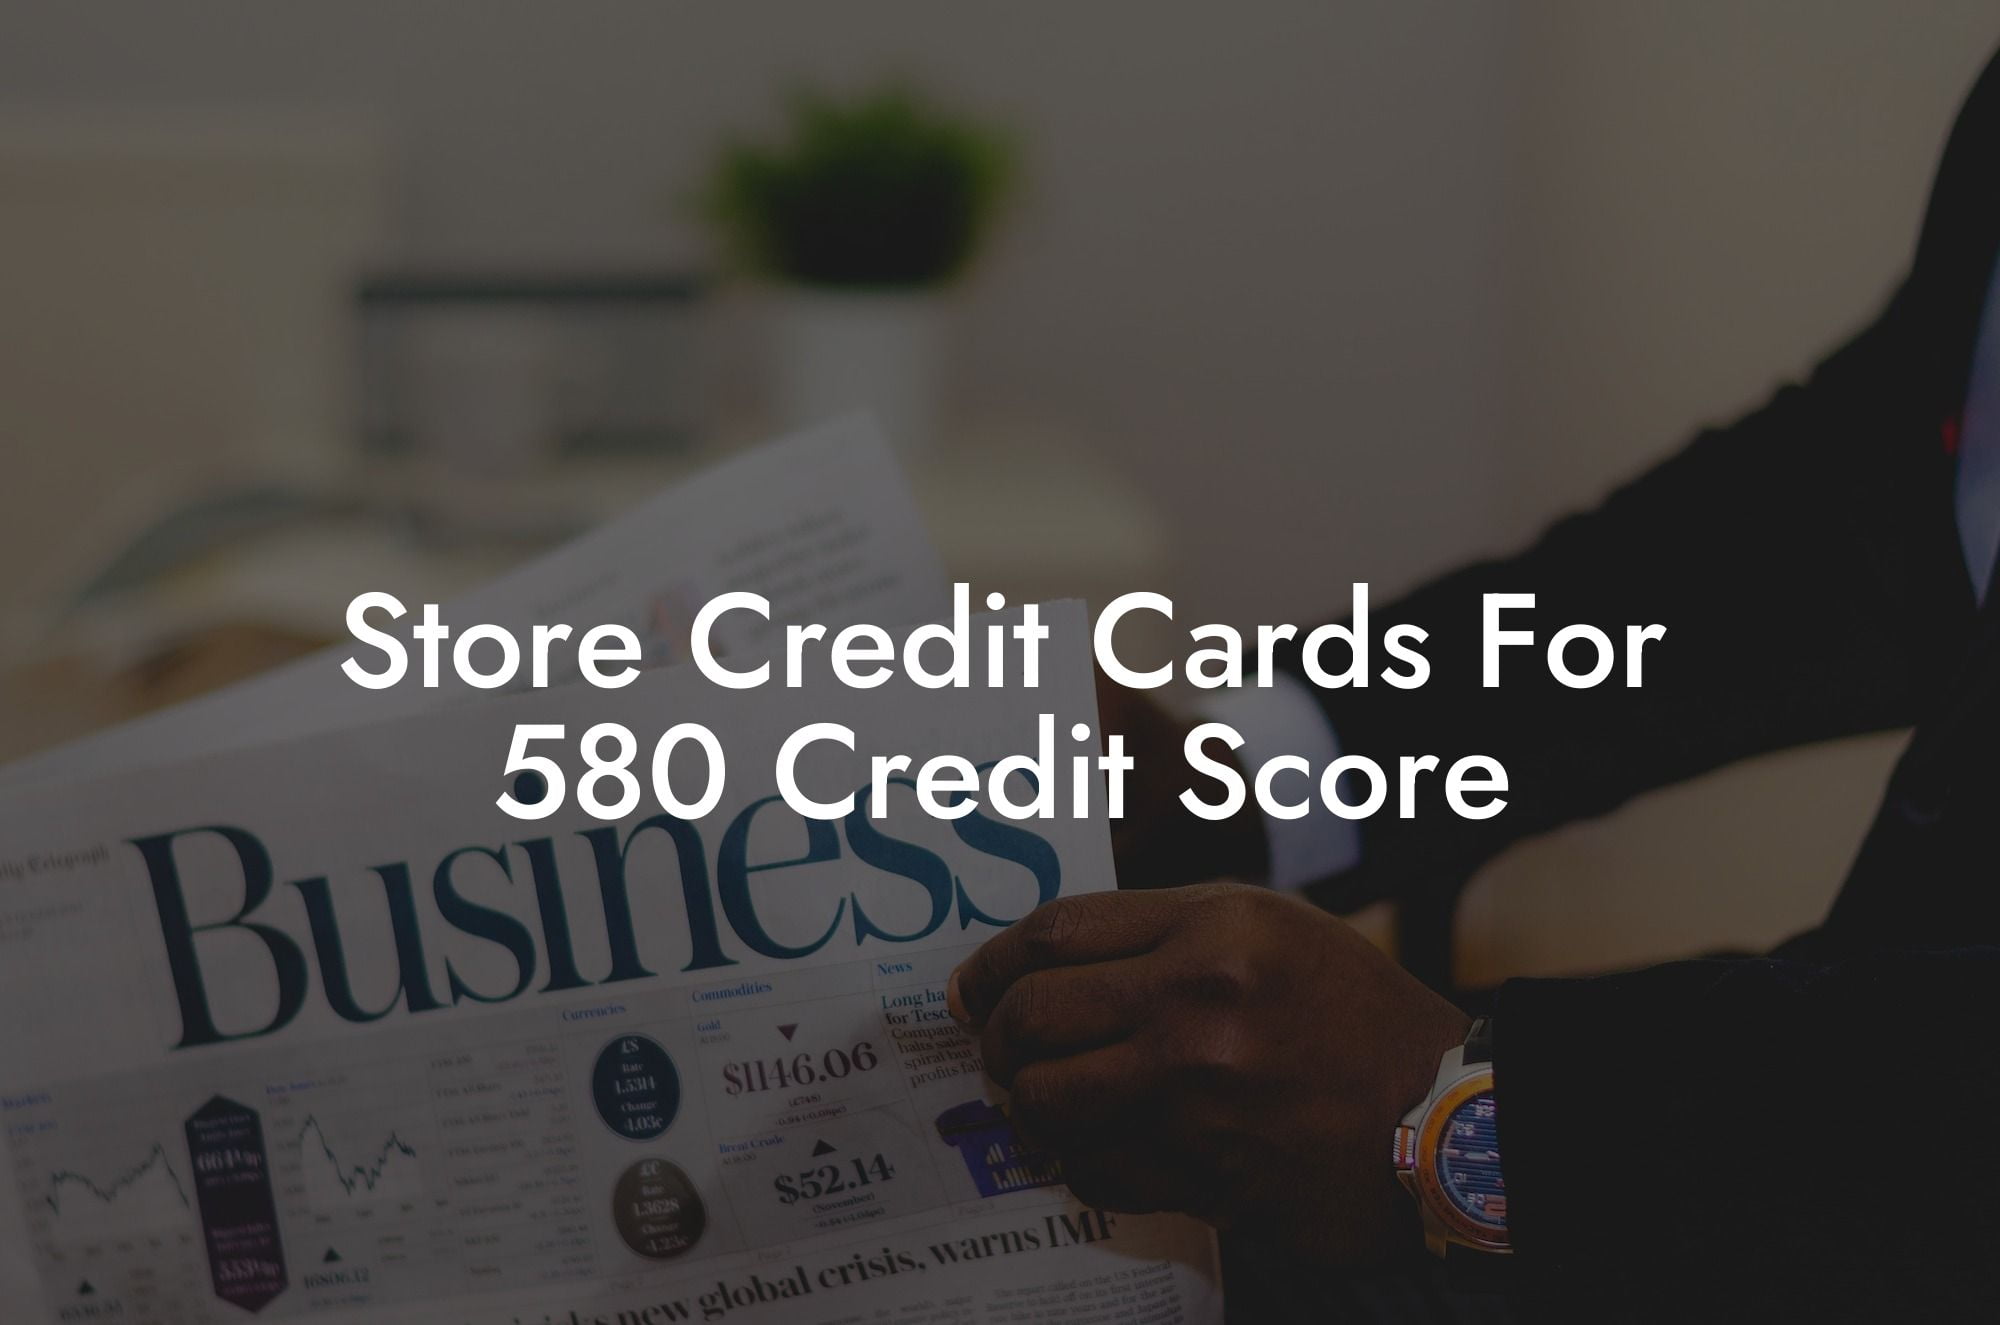 Store Credit Cards For 580 Credit Score